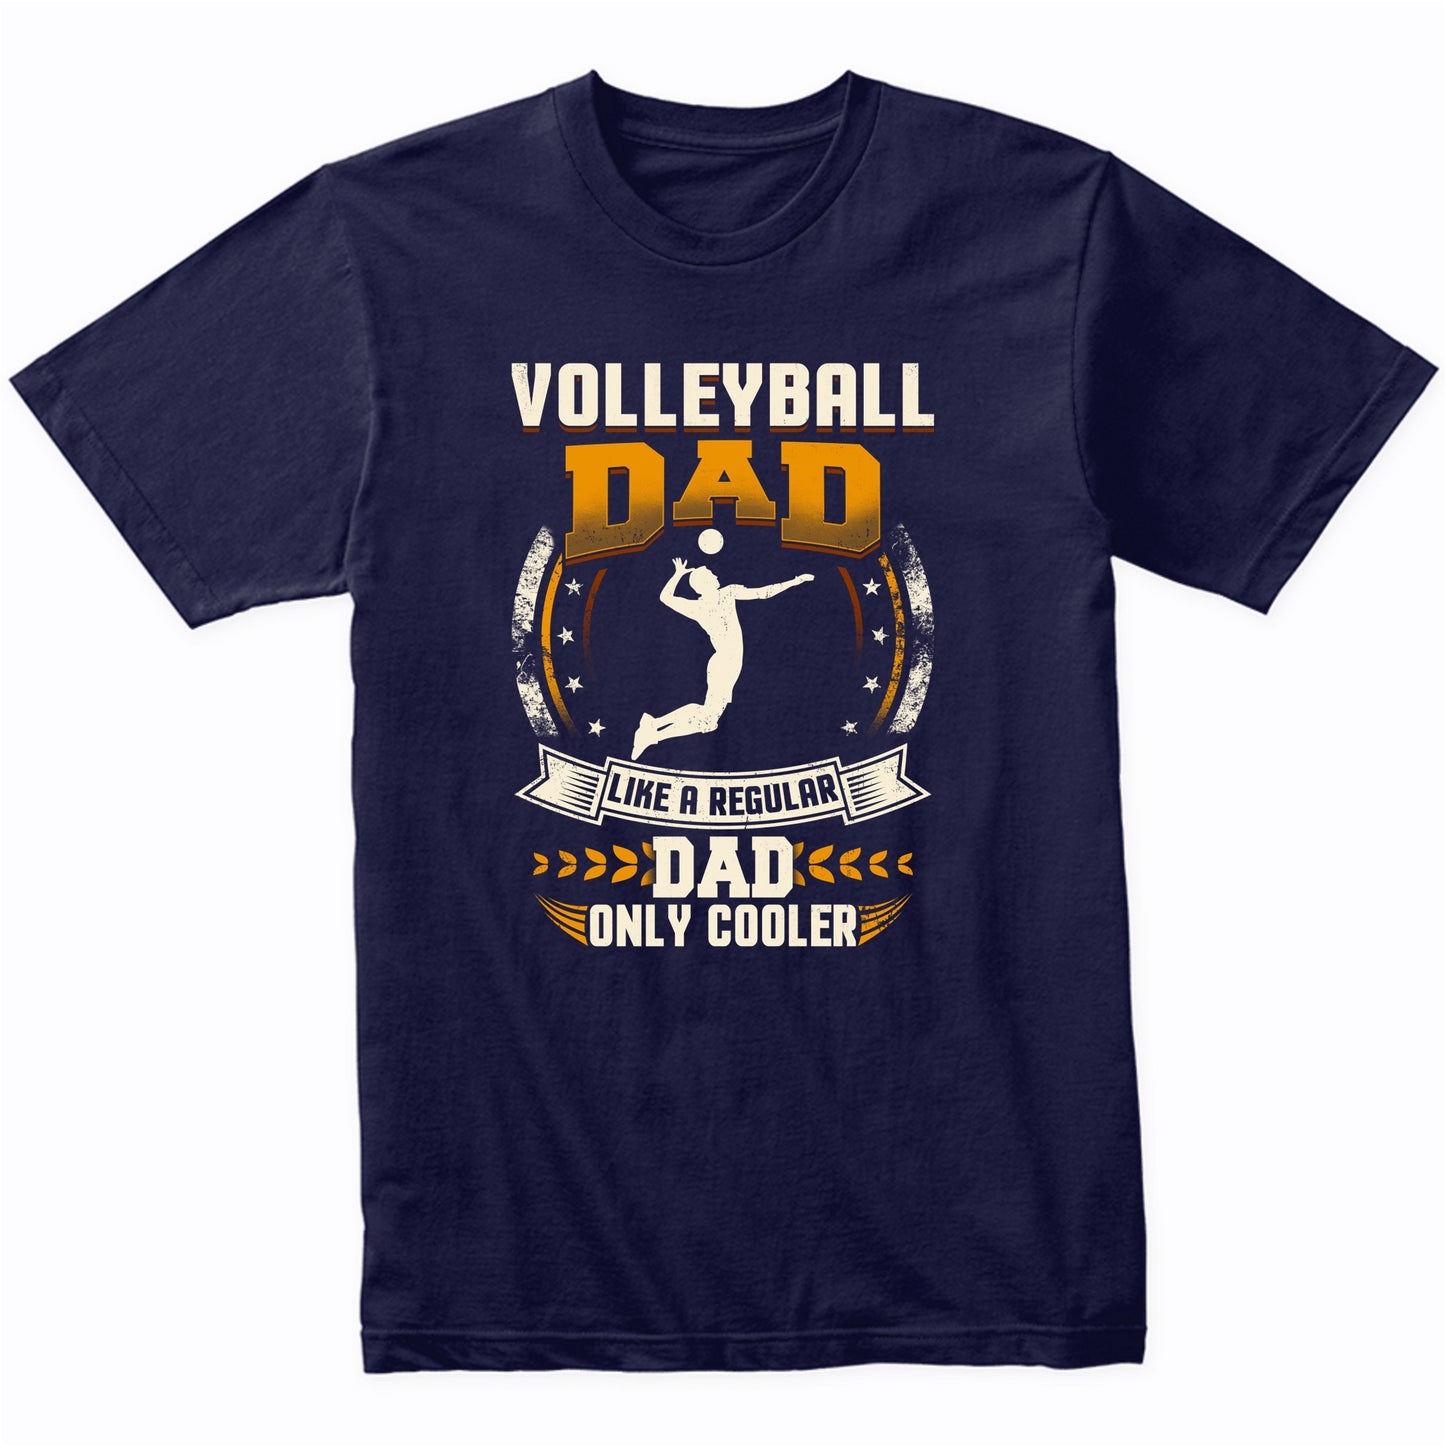 Volleyball Dad Like A Regular Dad Only Cooler Funny T-Shirt